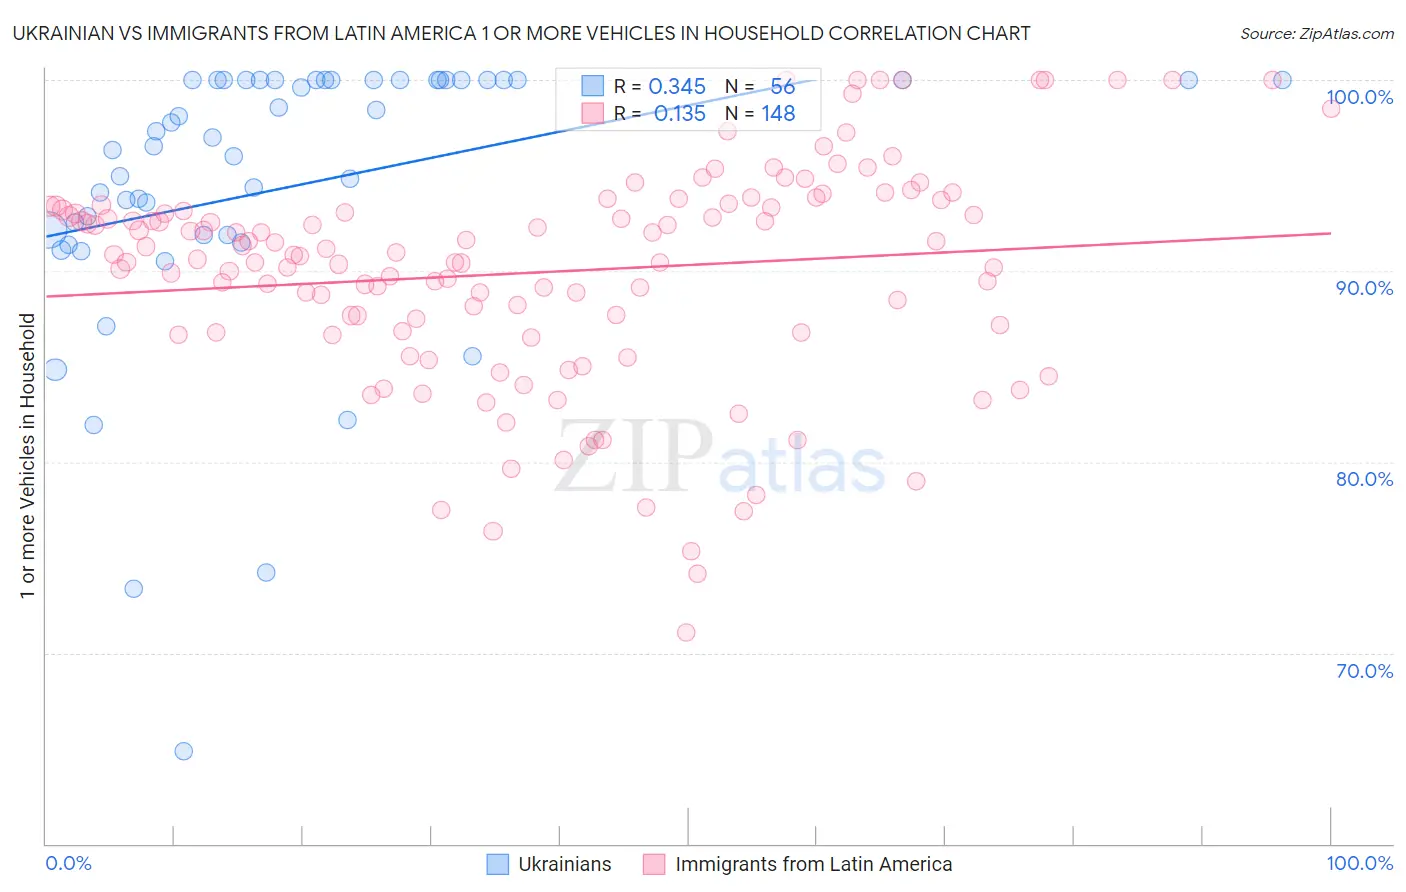 Ukrainian vs Immigrants from Latin America 1 or more Vehicles in Household